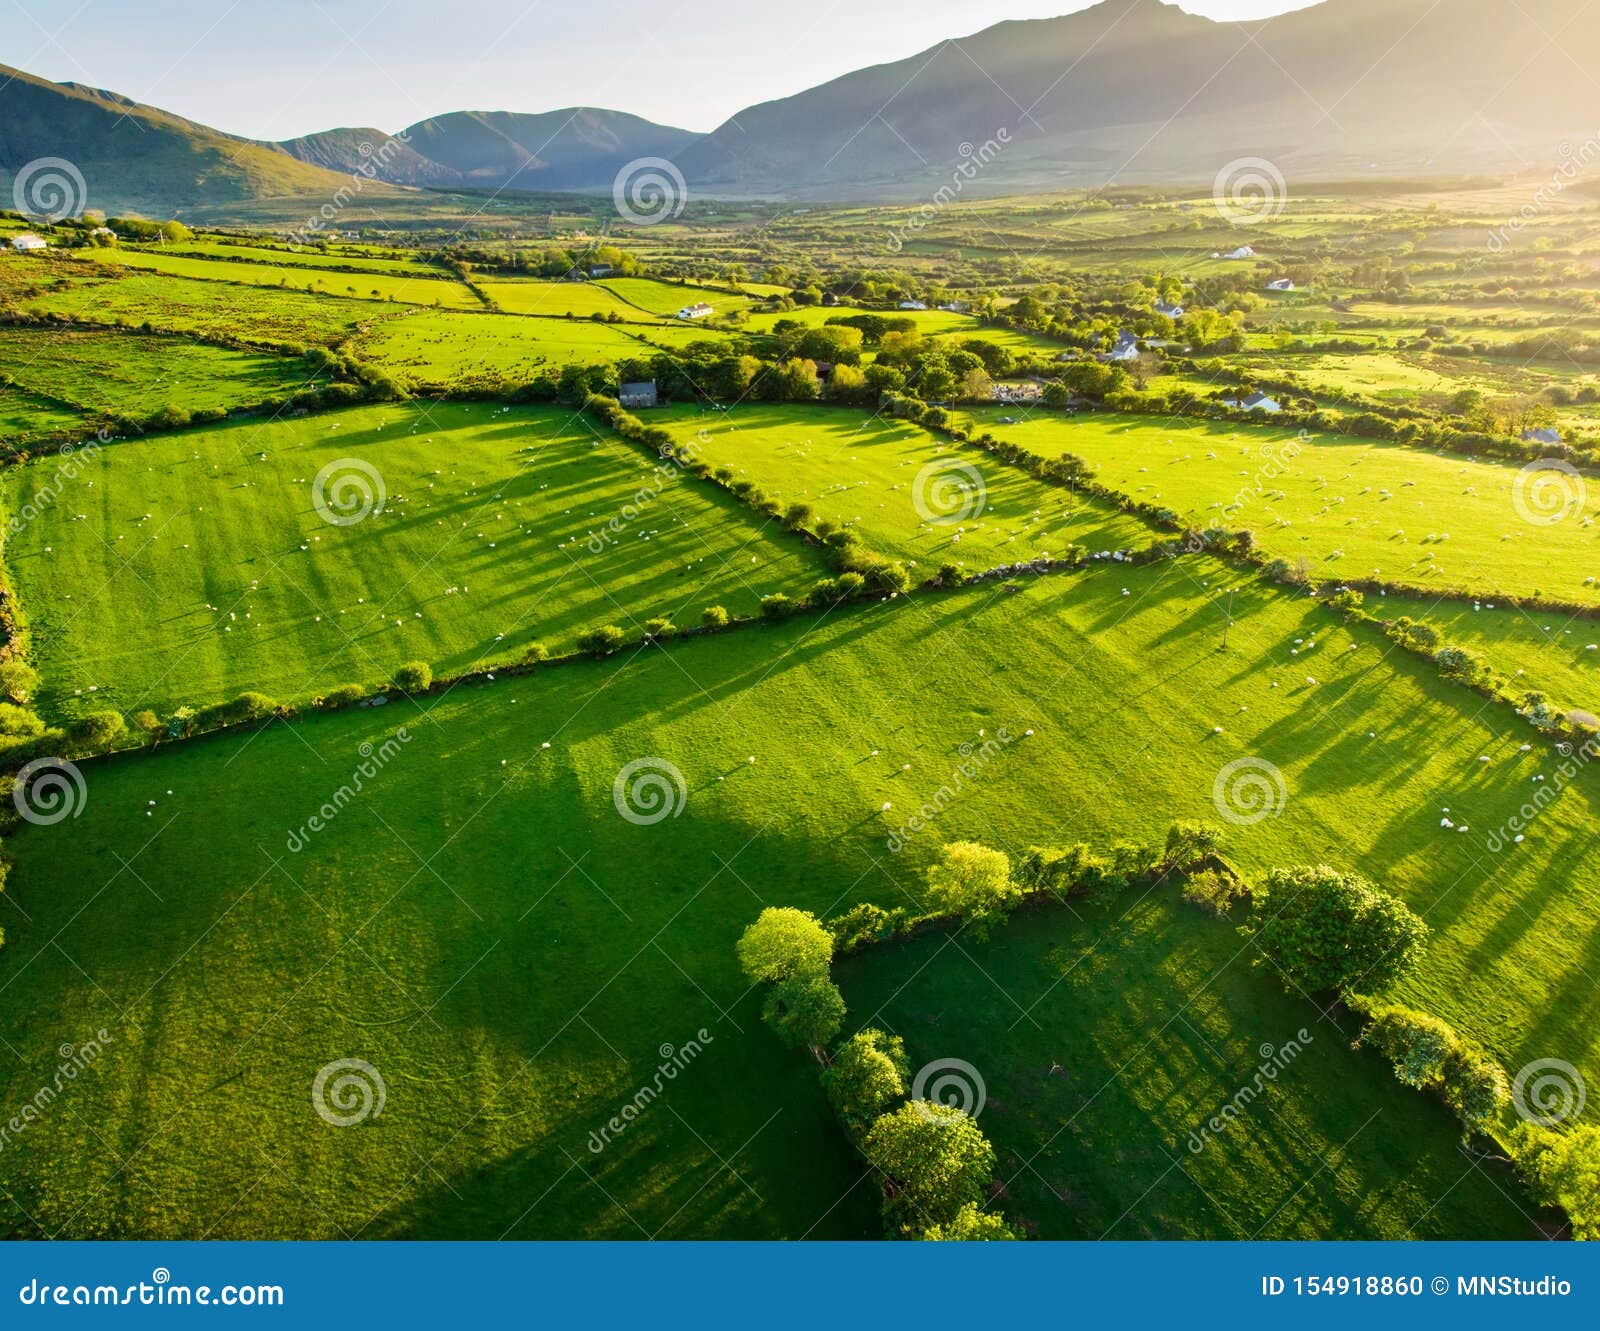 aerial view of endless lush pastures and farmlands of ireland. beautiful irish countryside with green fields and meadows. rural